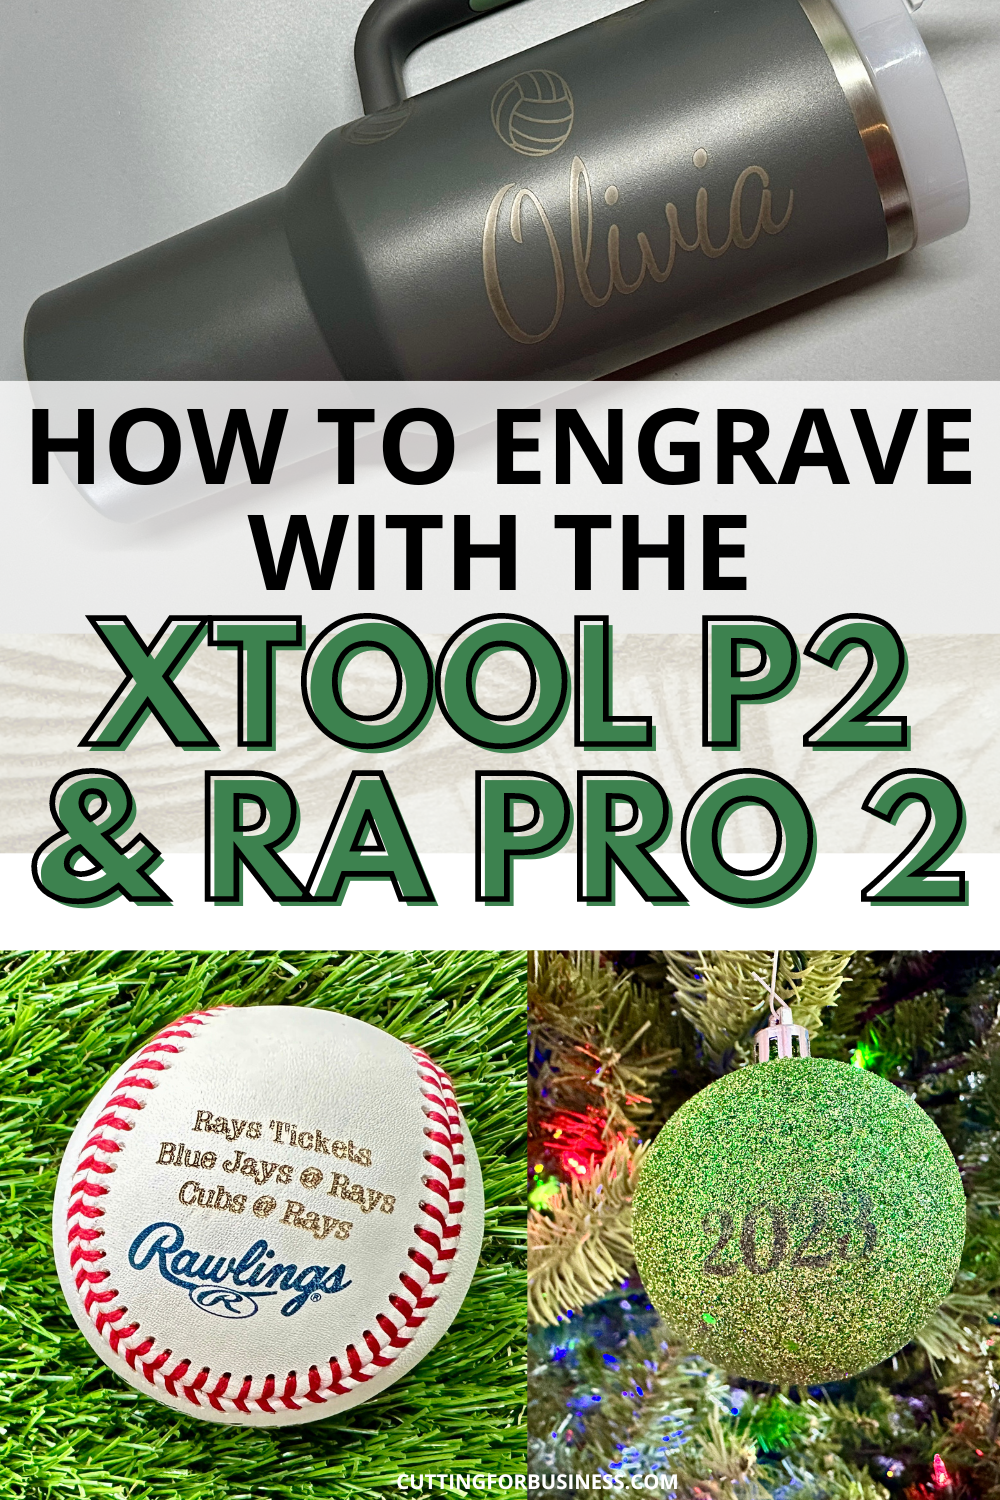 xTool P2: How to Engrave with the RA Pro 2 Rotary Attachment - cuttingforbusiness.com